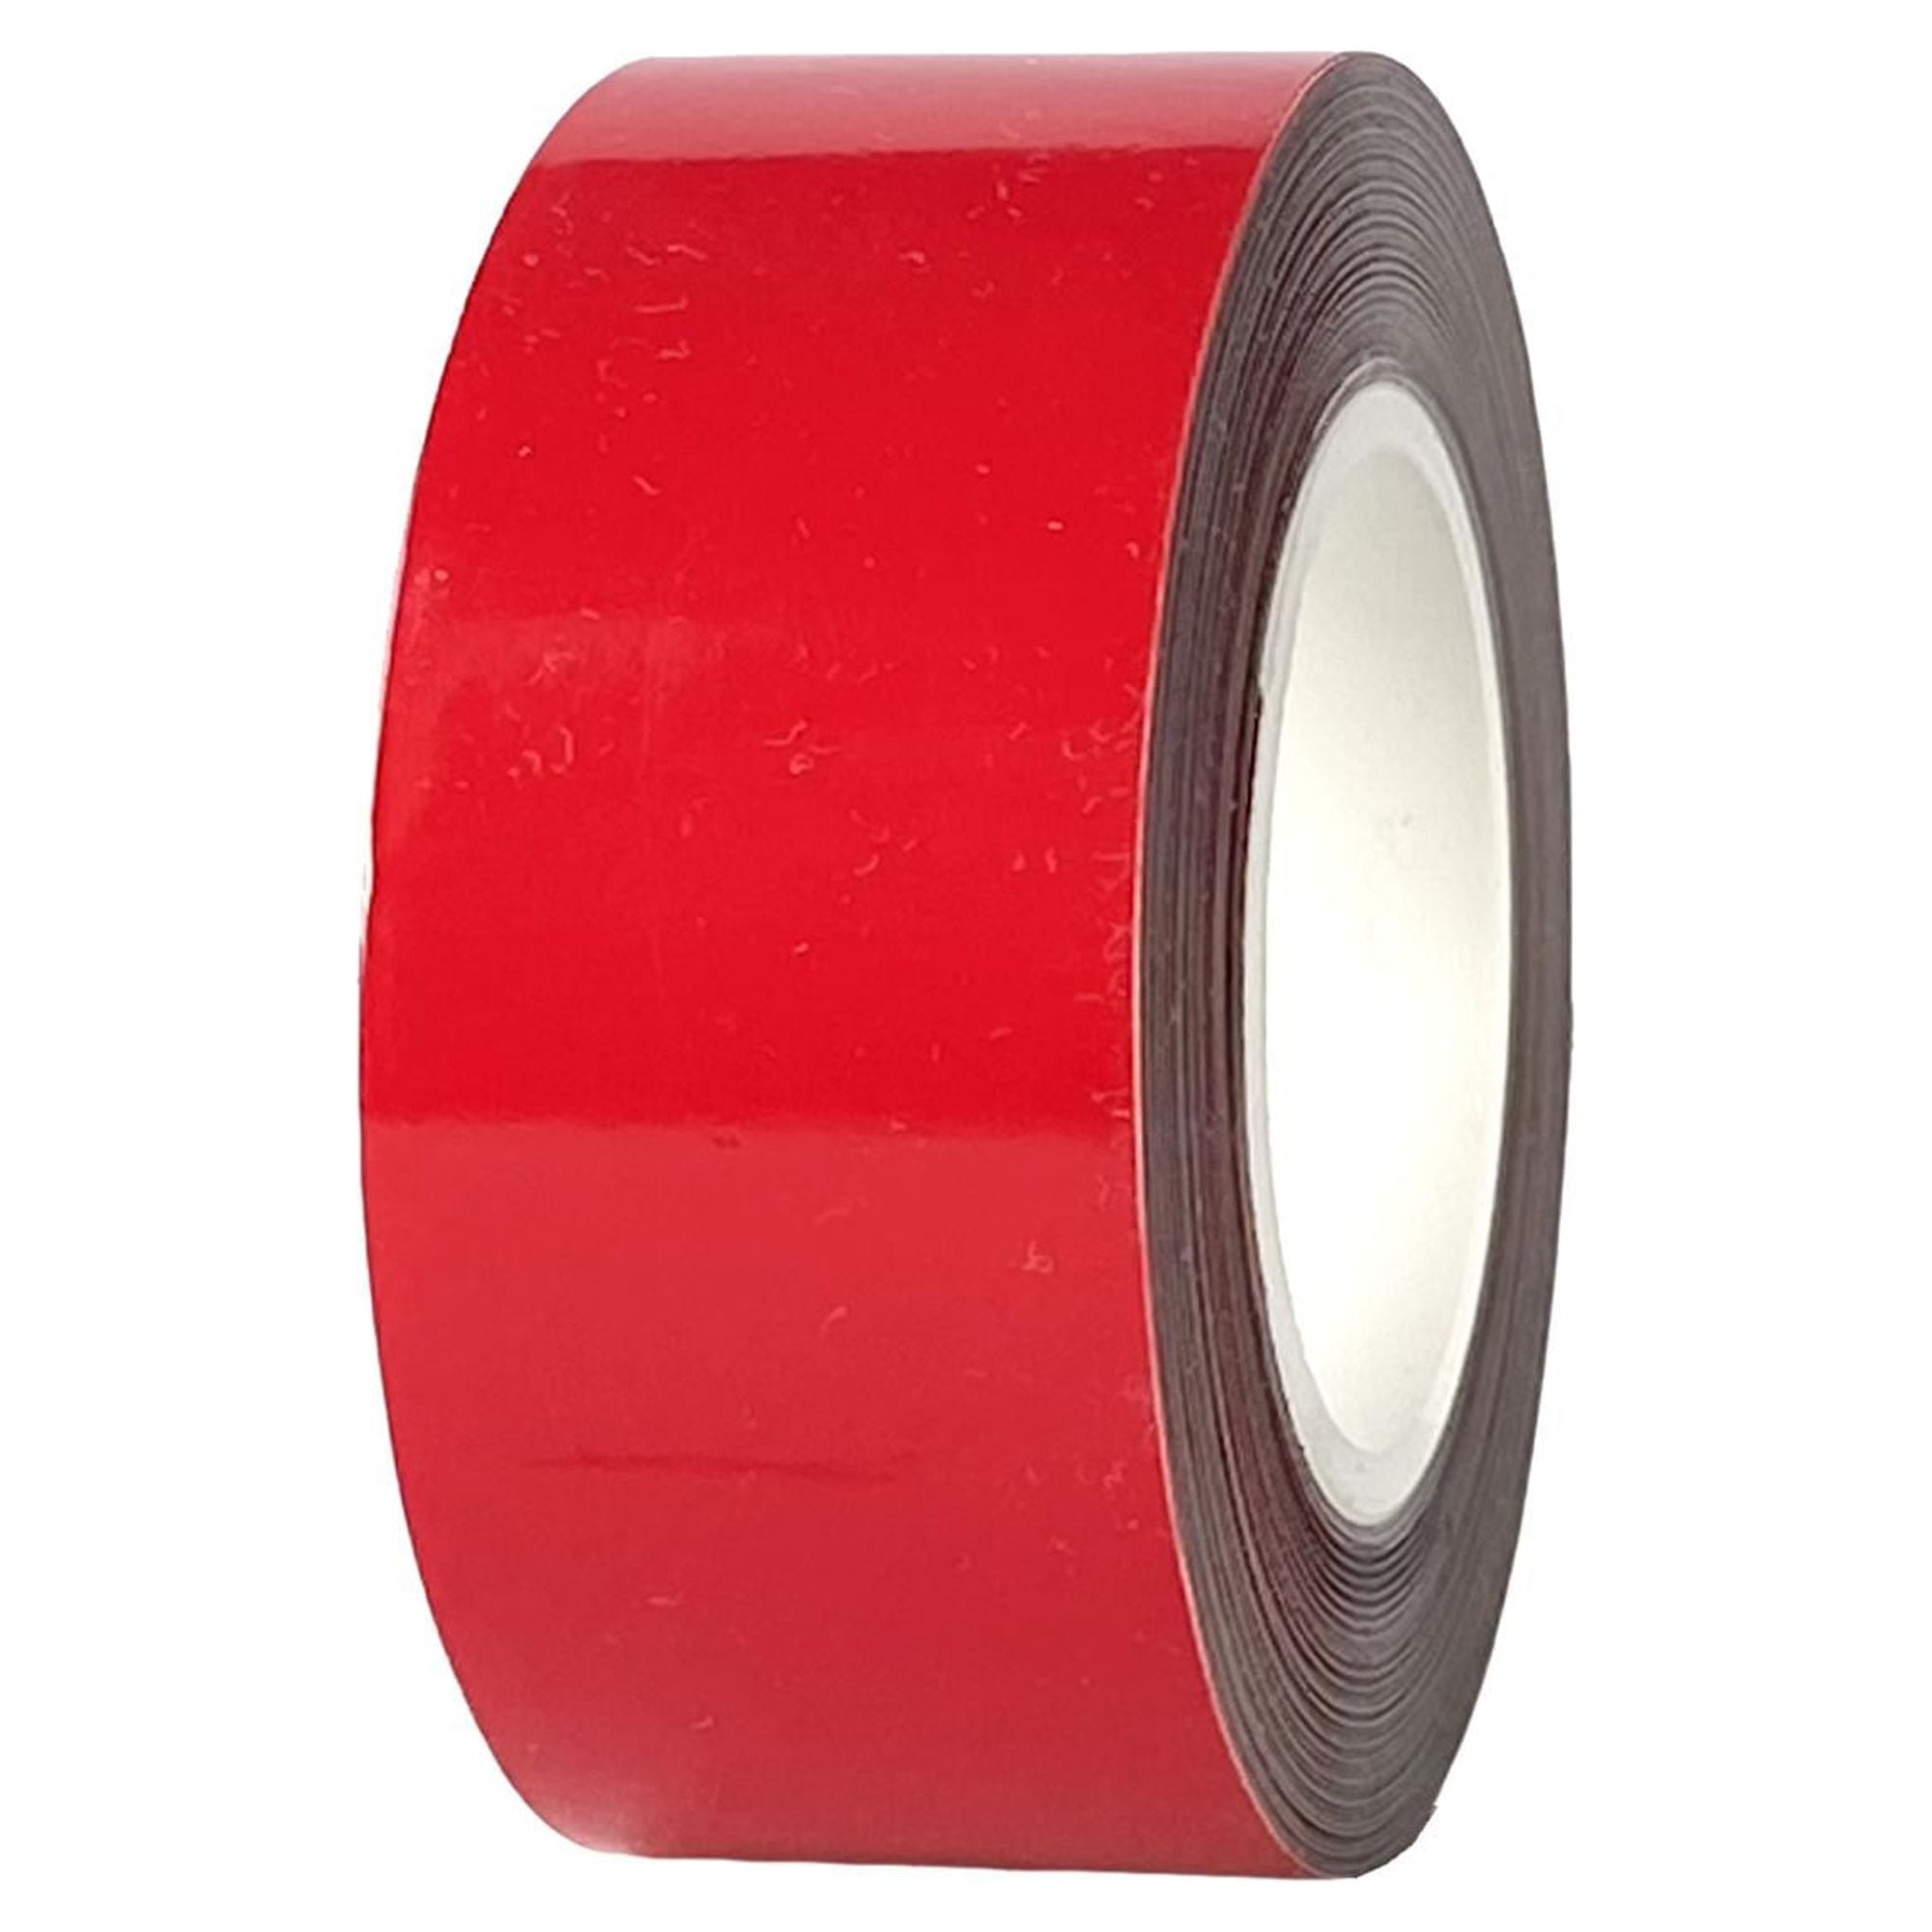 Transparent Vinyl Tape with Self-Adhesive. (2 inch x 25 ft, Red)